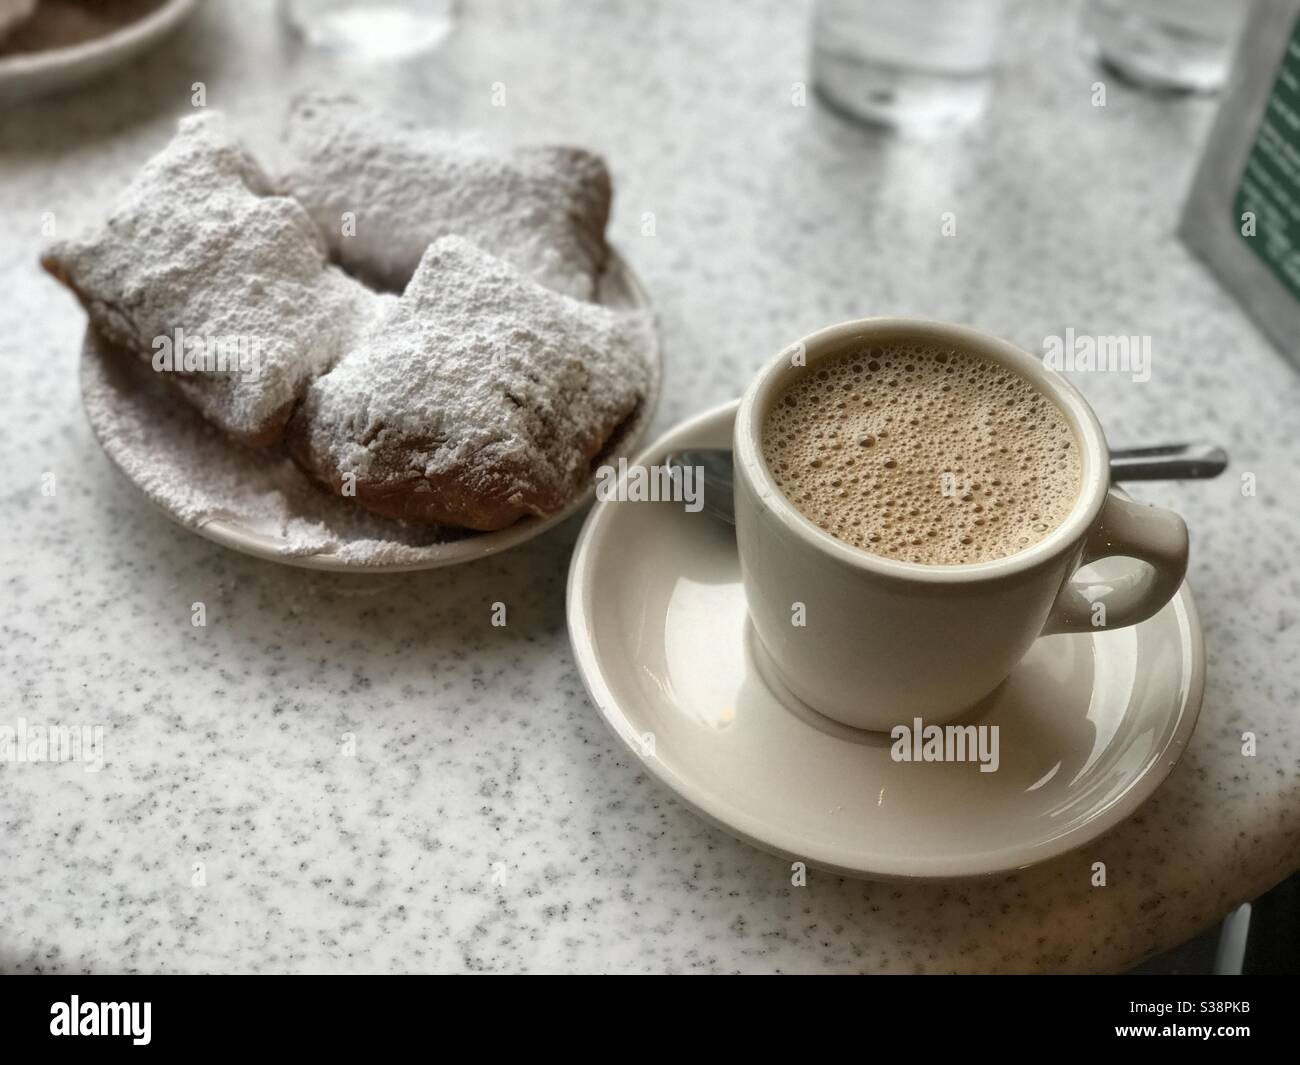 Beignets and coffee at a cafe in New Orleans. Stock Photo